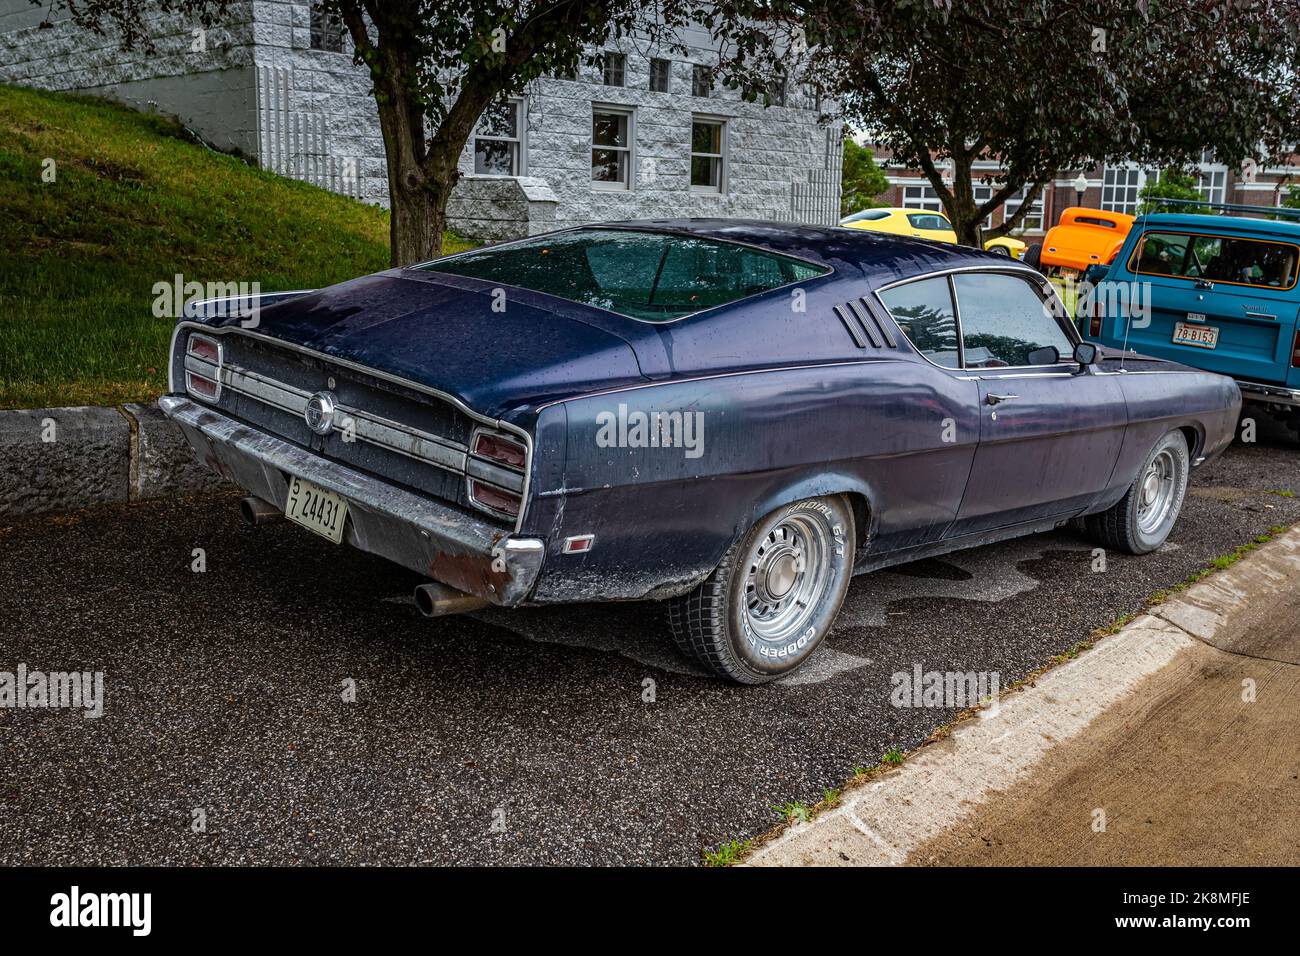 Des Moines, IA - July 01, 2022: High perspective rear corner view of a 1969 Ford Torino Talladega 428 Coupe at a local car show. Stock Photo